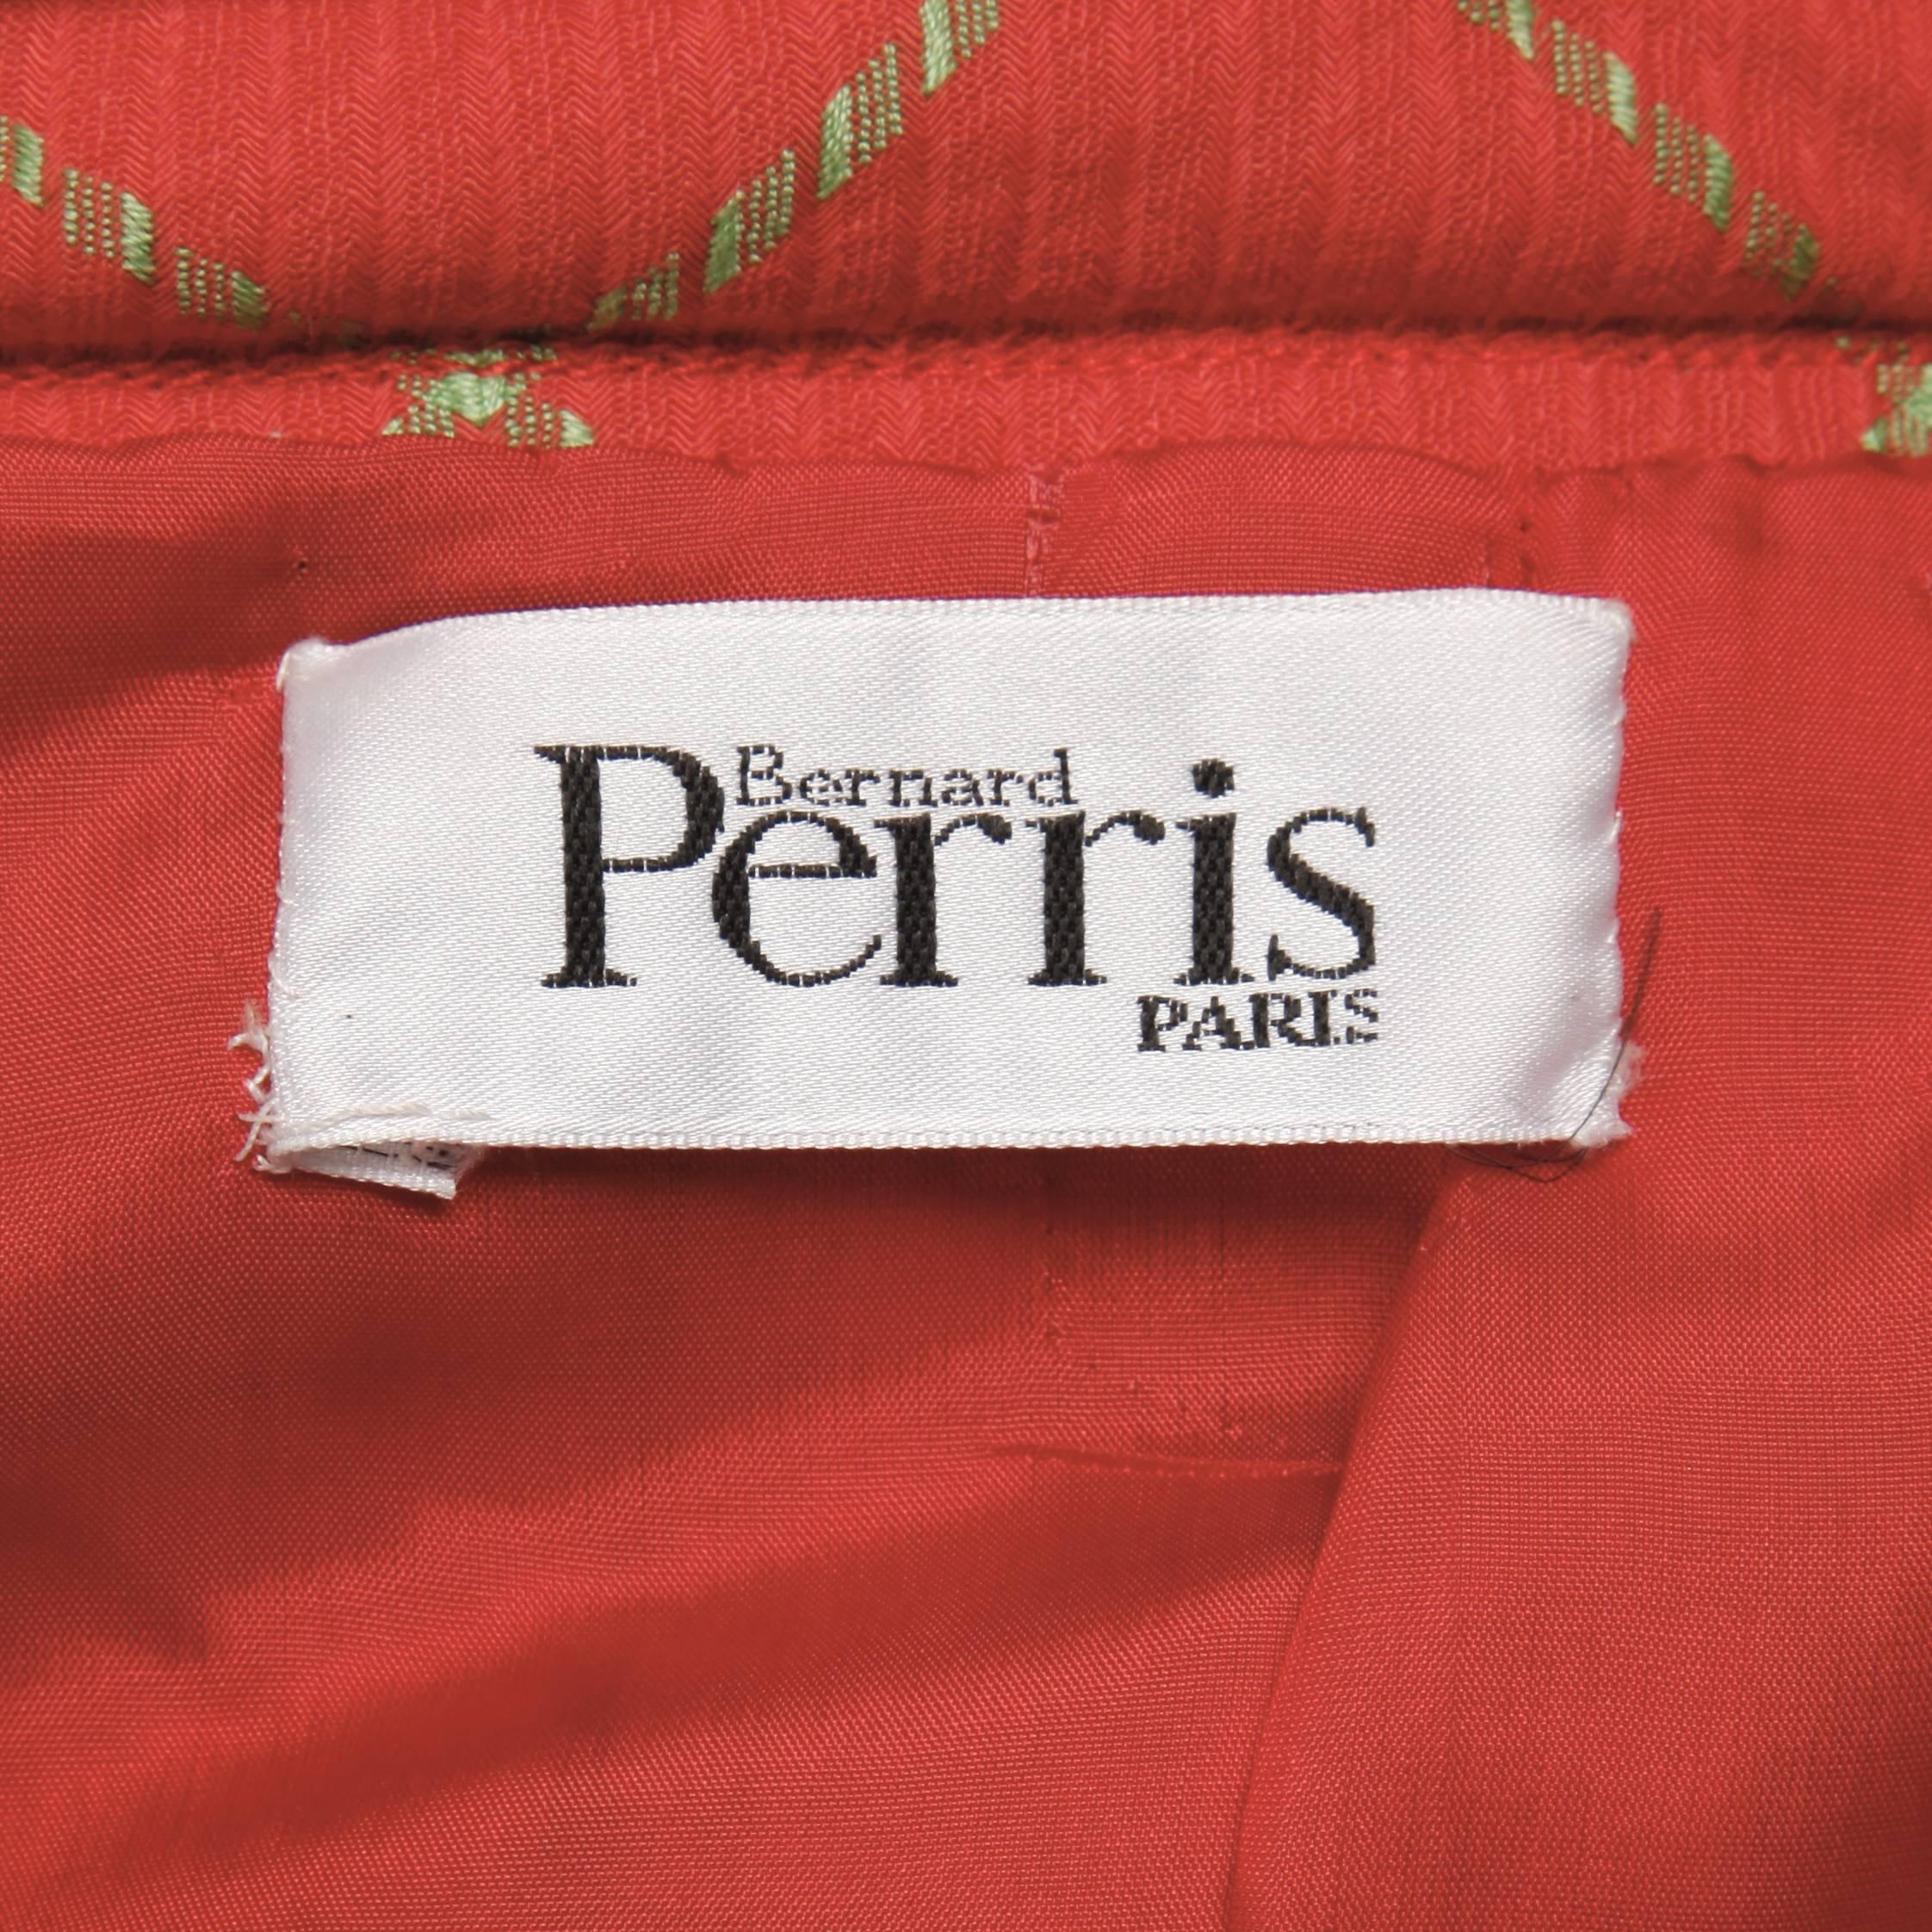 Gorgeous vintage Bernard Perris skirt suit in a coral red and pale celery green plaid. Fabric feels like a cashmere/ wool blend. Fully lined with front zip closure on jacket and rear zip and button closure on skirt. Structured shoulder pads are sewn